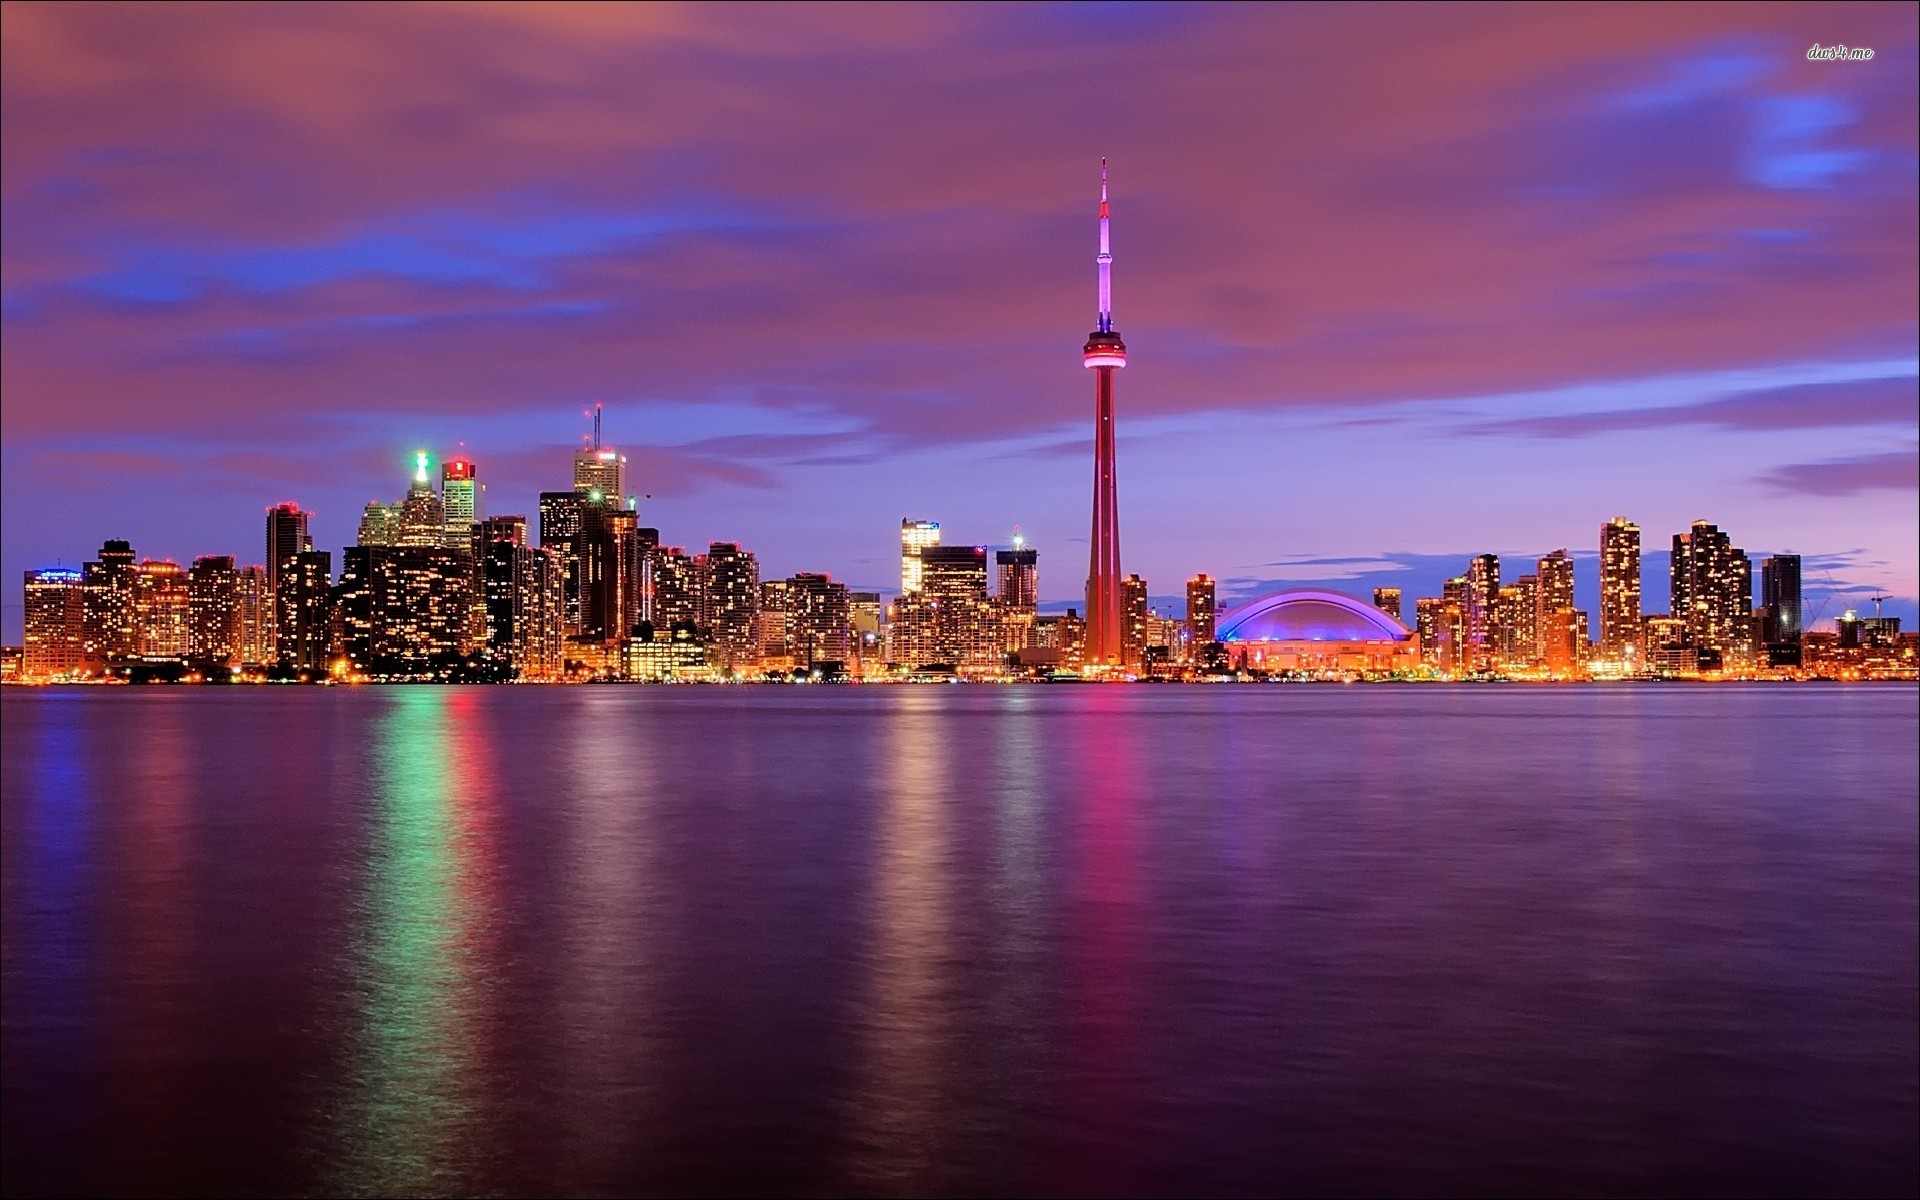 [DEAL EXPIRED] Vancouver to Toronto $405 CAD | Toronto to Vancouver $431 CAD | roundtrip including taxes | WestJet – nonstop flight